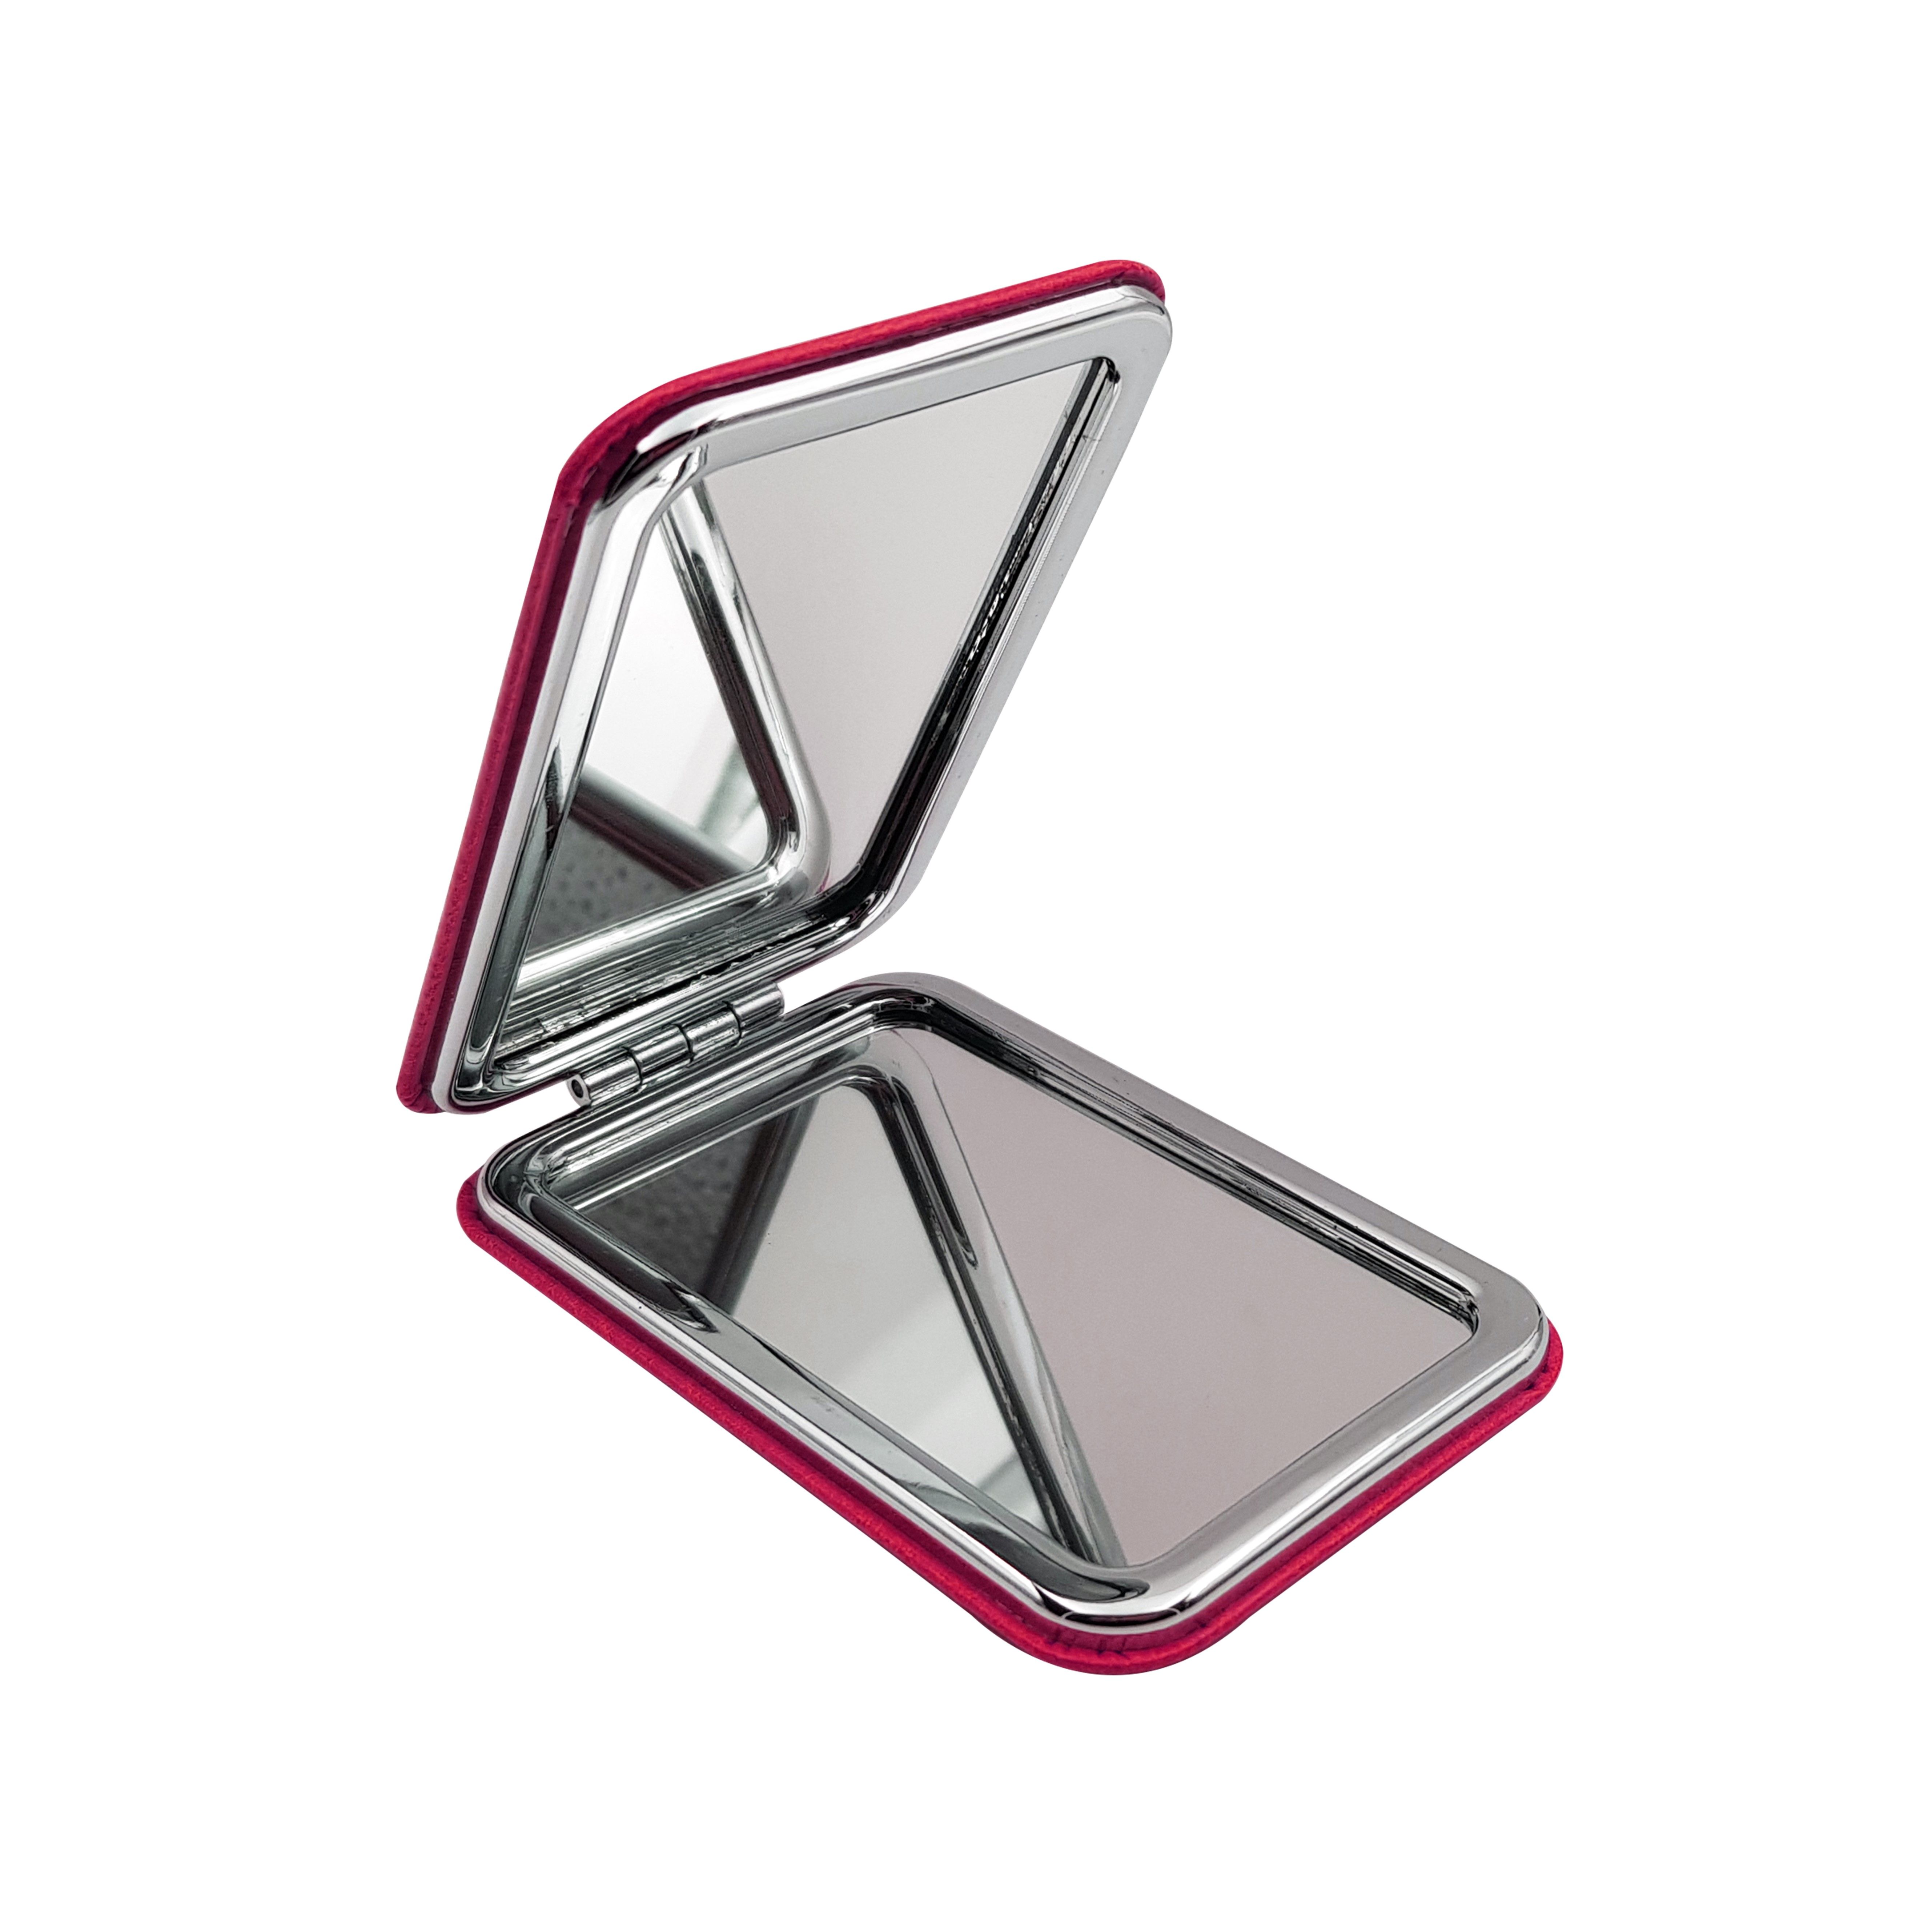 Majestique Rectangle Compact Mirror Pu 1x/2x Magnification Portable (Color May Vary)